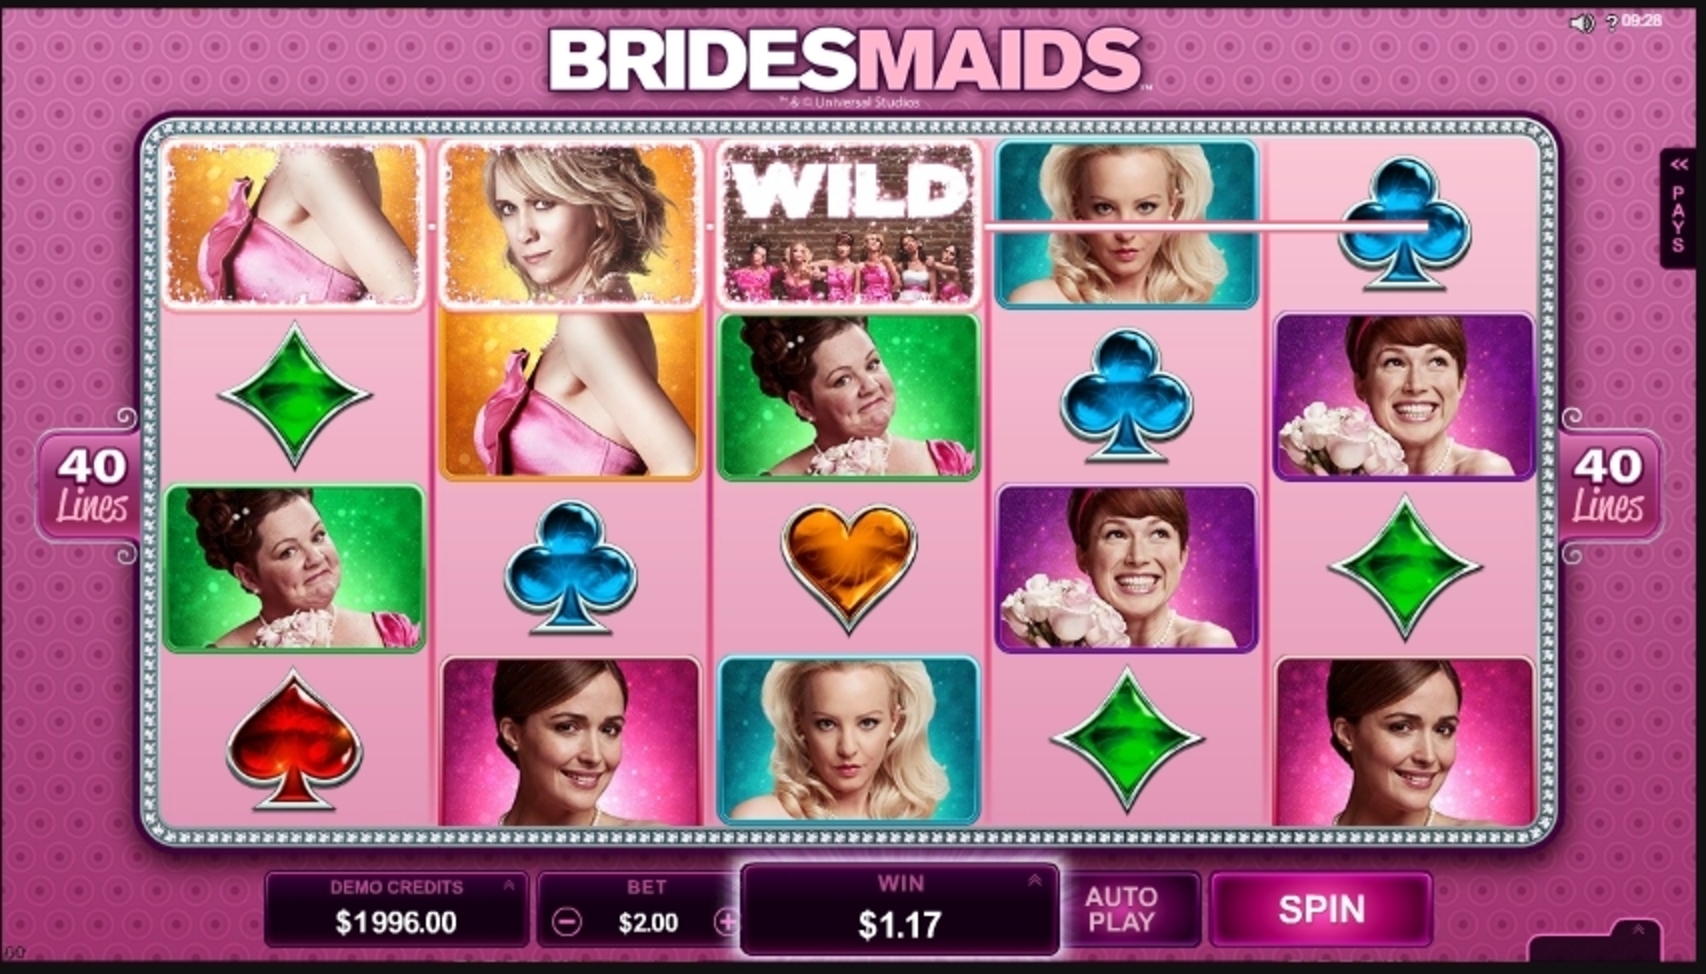 Win Money in Bridesmaids Free Slot Game by Microgaming